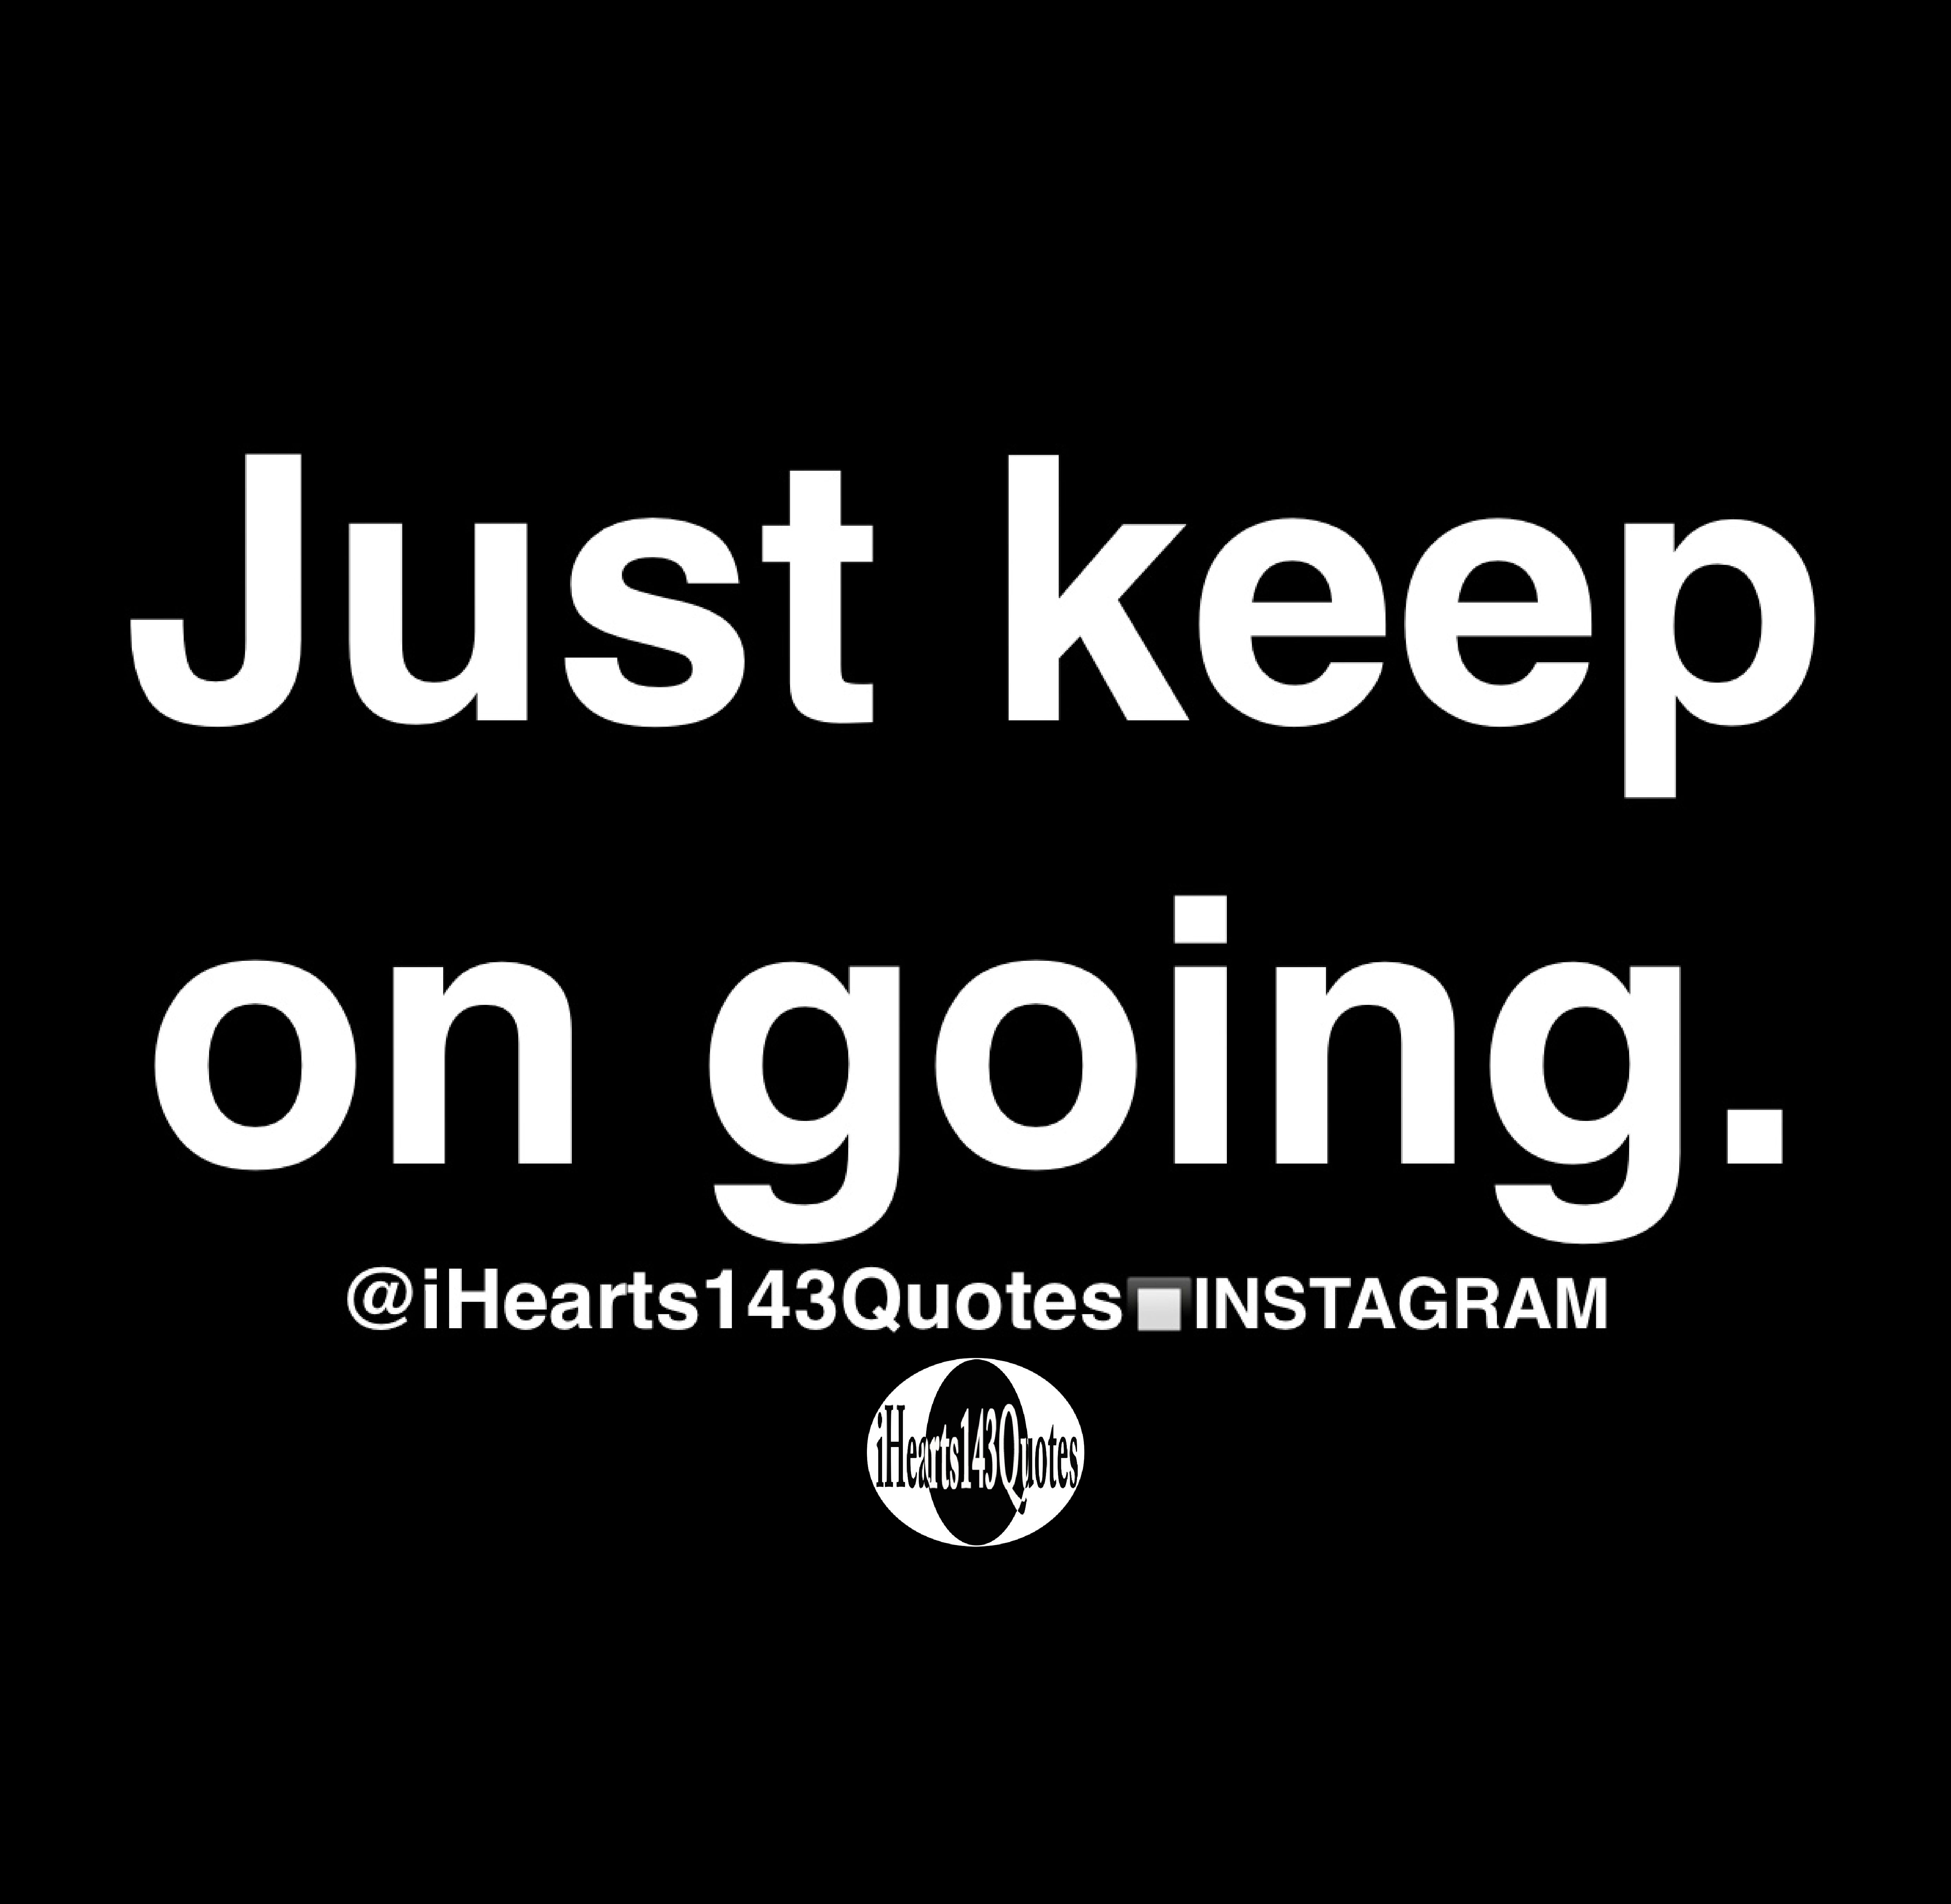 Just keep on going - Quotes - iHearts143Quotes